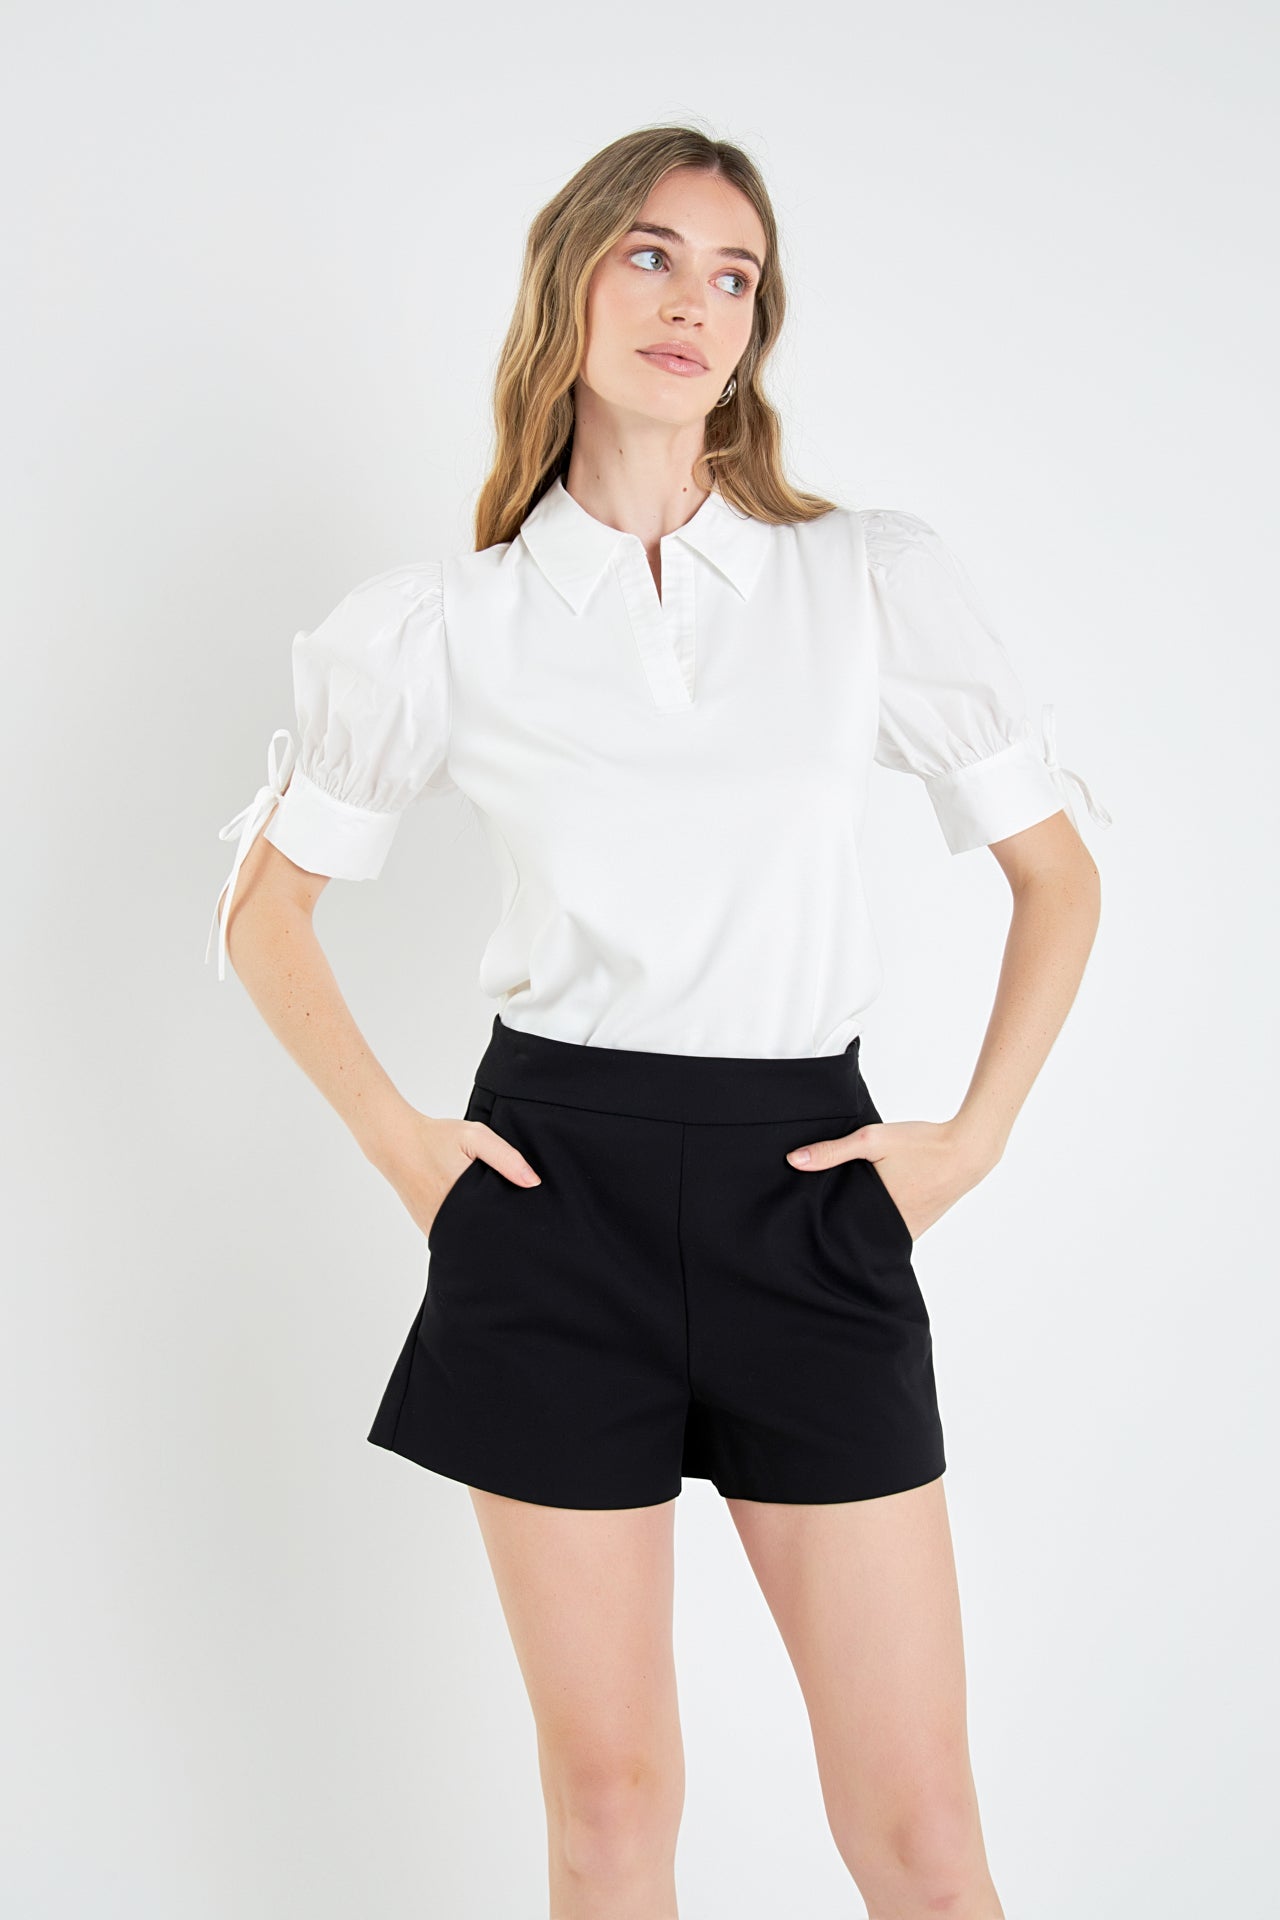 ENGLISH FACTORY - Mix Media Collar Top - TOPS available at Objectrare